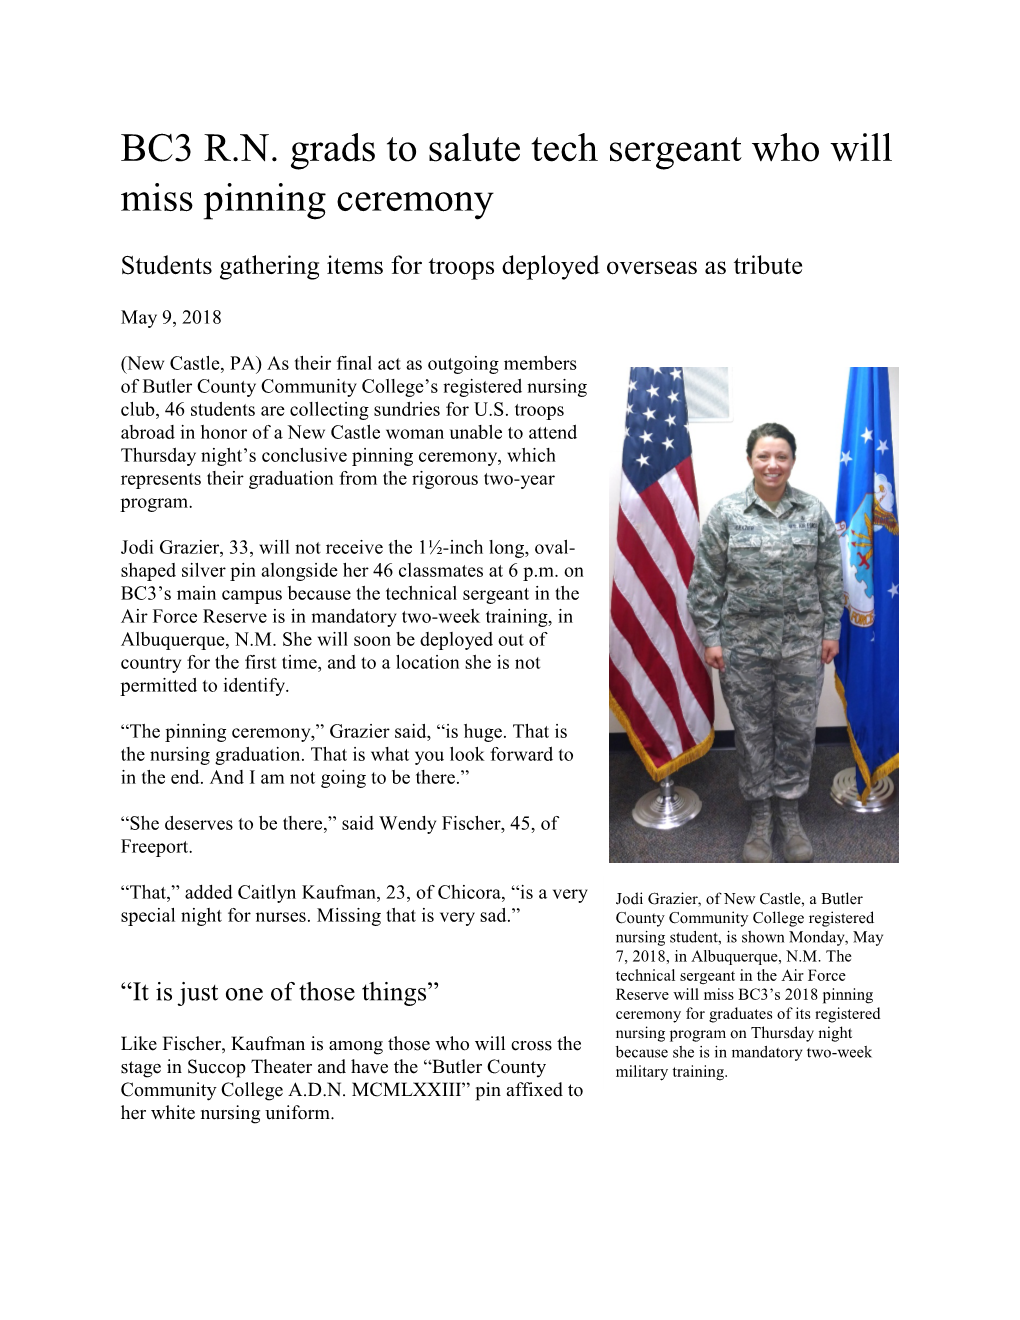 BC3 R.N. Grads to Salute Tech Sergeant Who Will Miss Pinning Ceremony